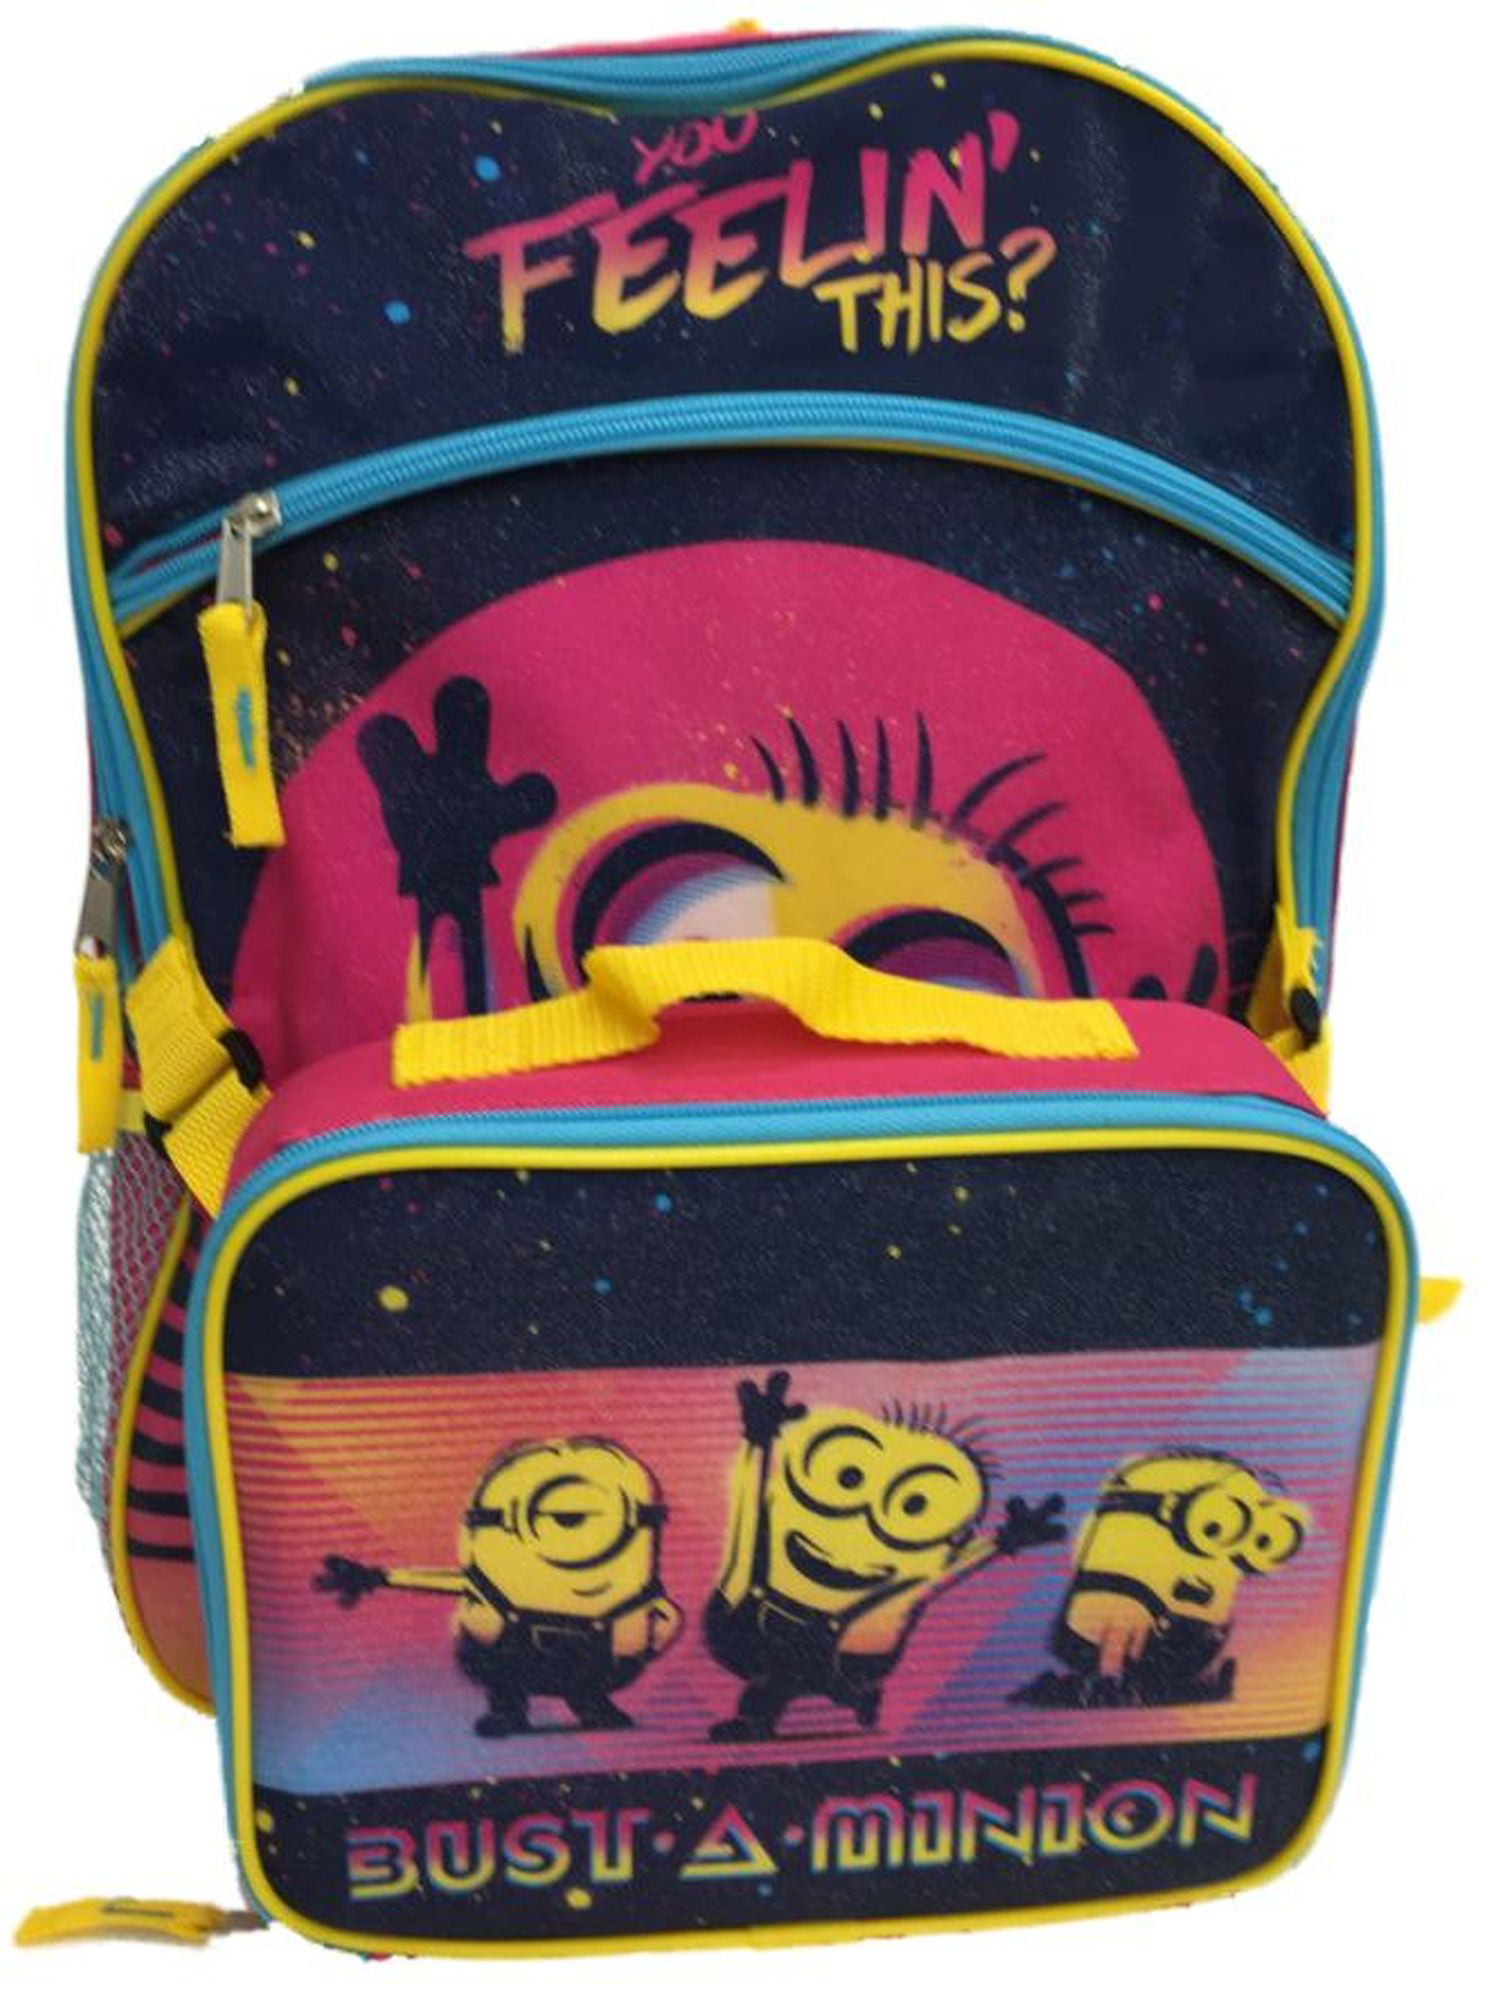 Despicable Me Minions Messenger School Bag New Gift Despatch Backpack Rucksack 